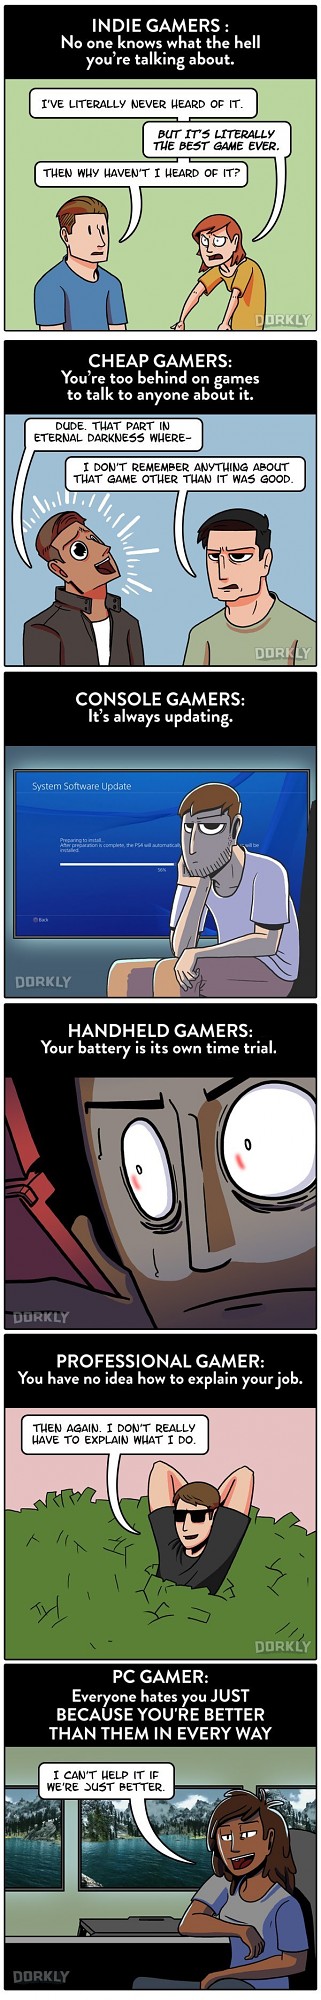 Different types of Problems Gamers have